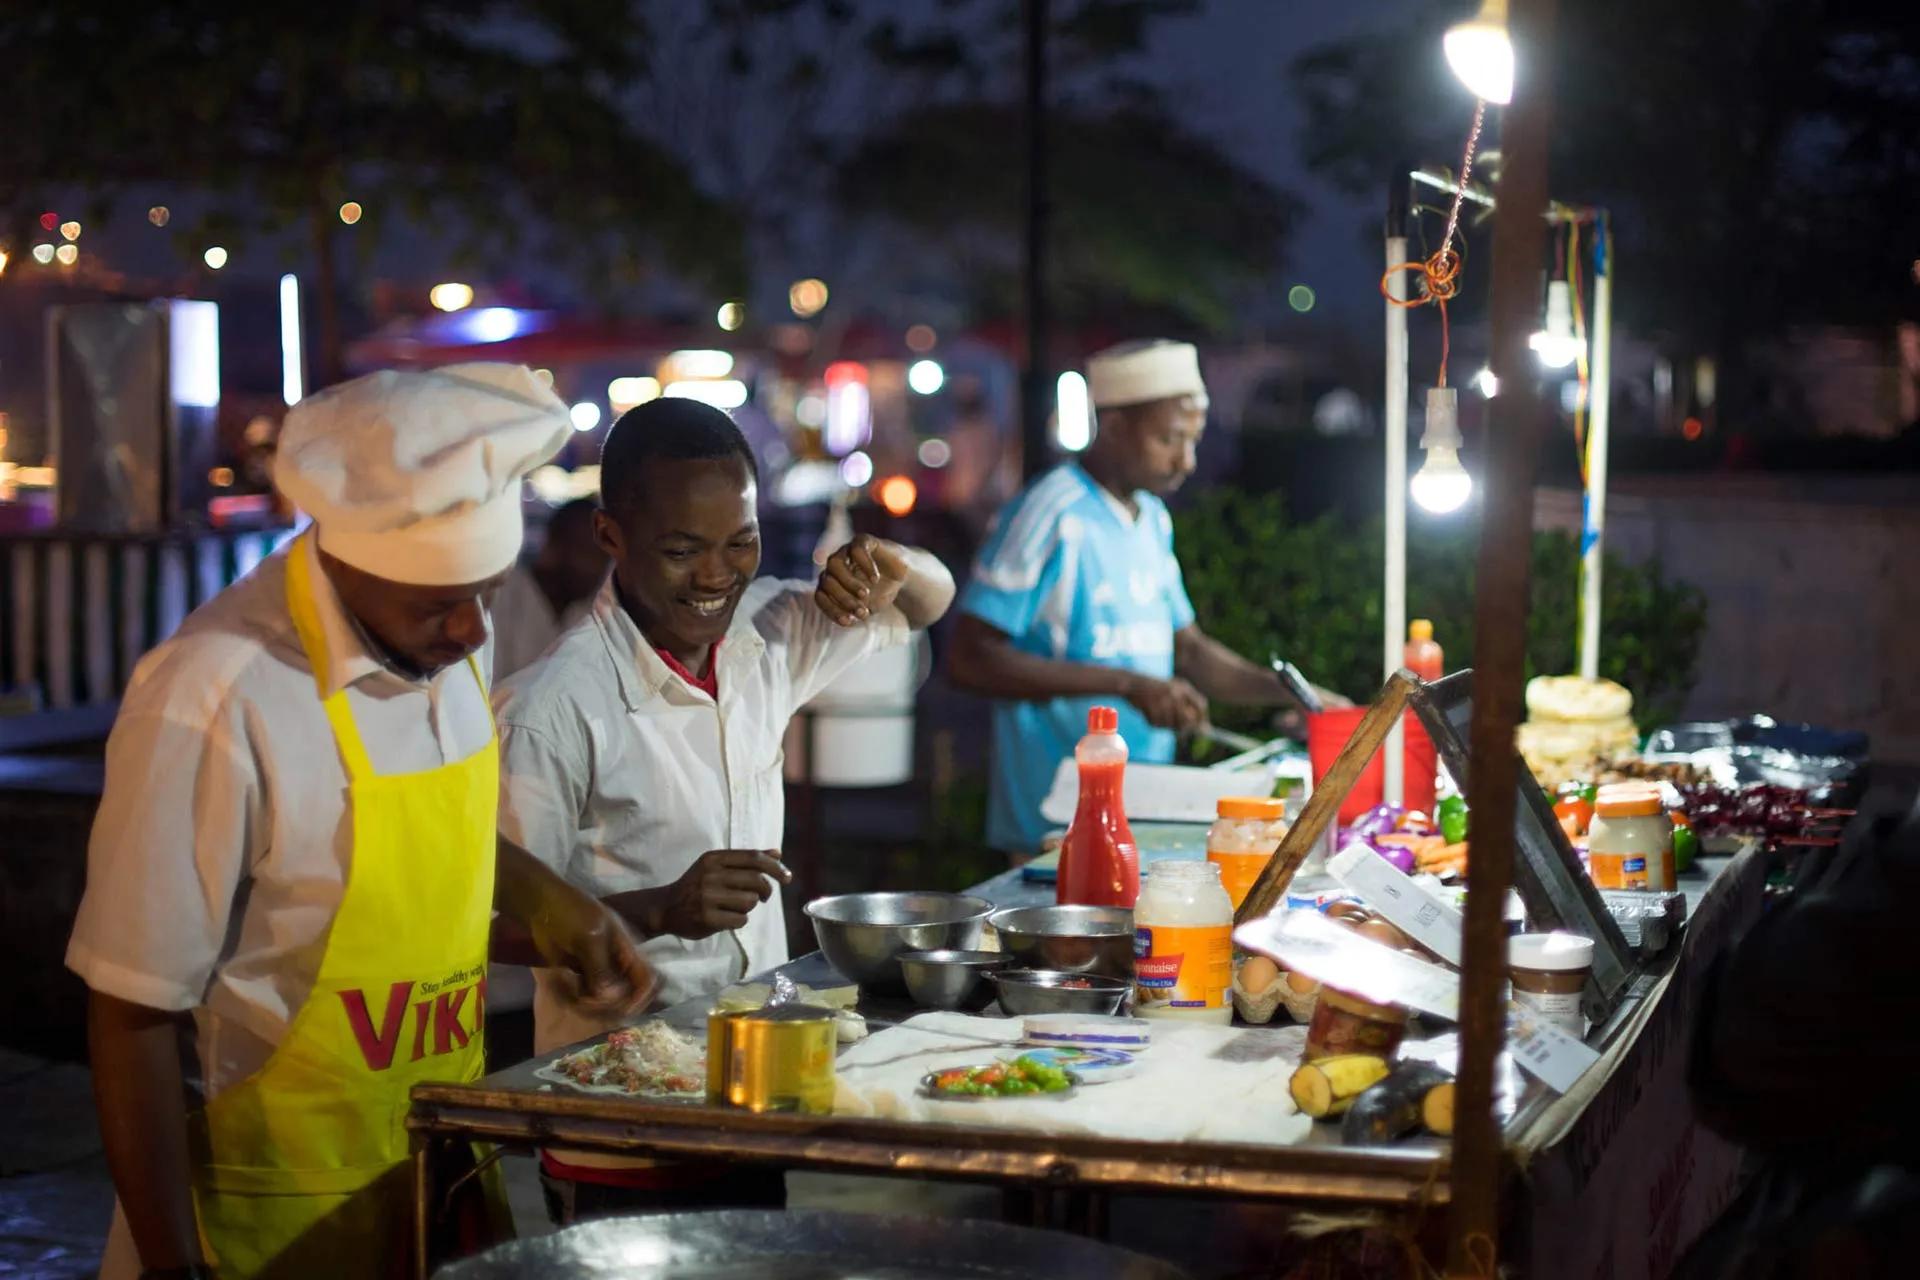 A fresh produce market becomes a night-time destination for busy Ugandans, thanks to the installation of a solar lighting array 🇺🇬